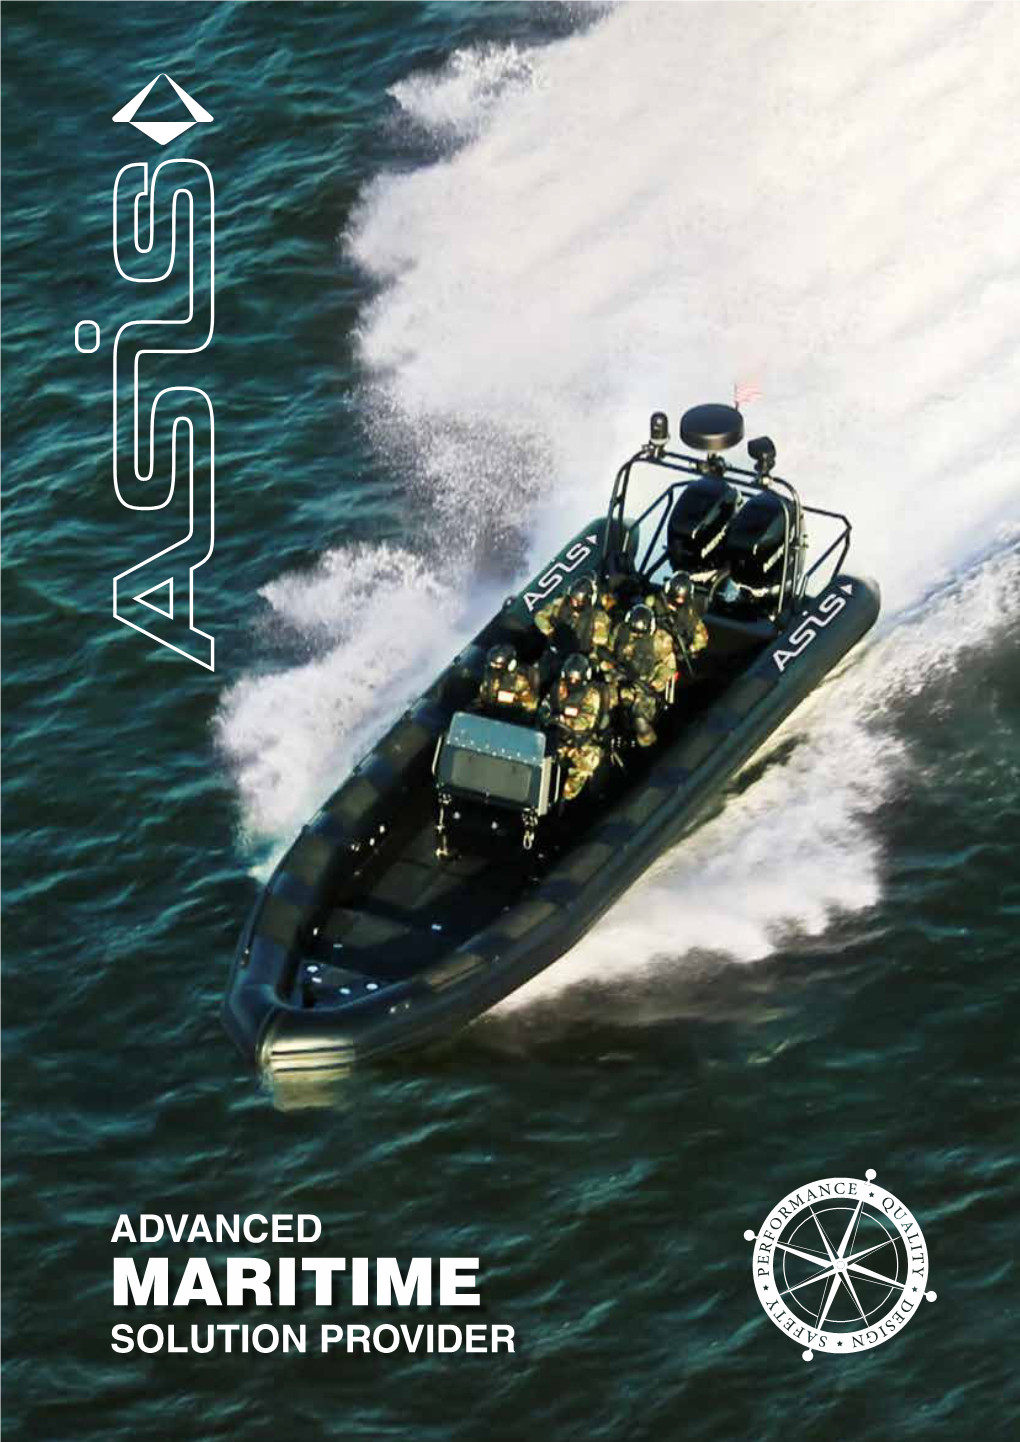 Maritime Solution Provider Military Table of Contents